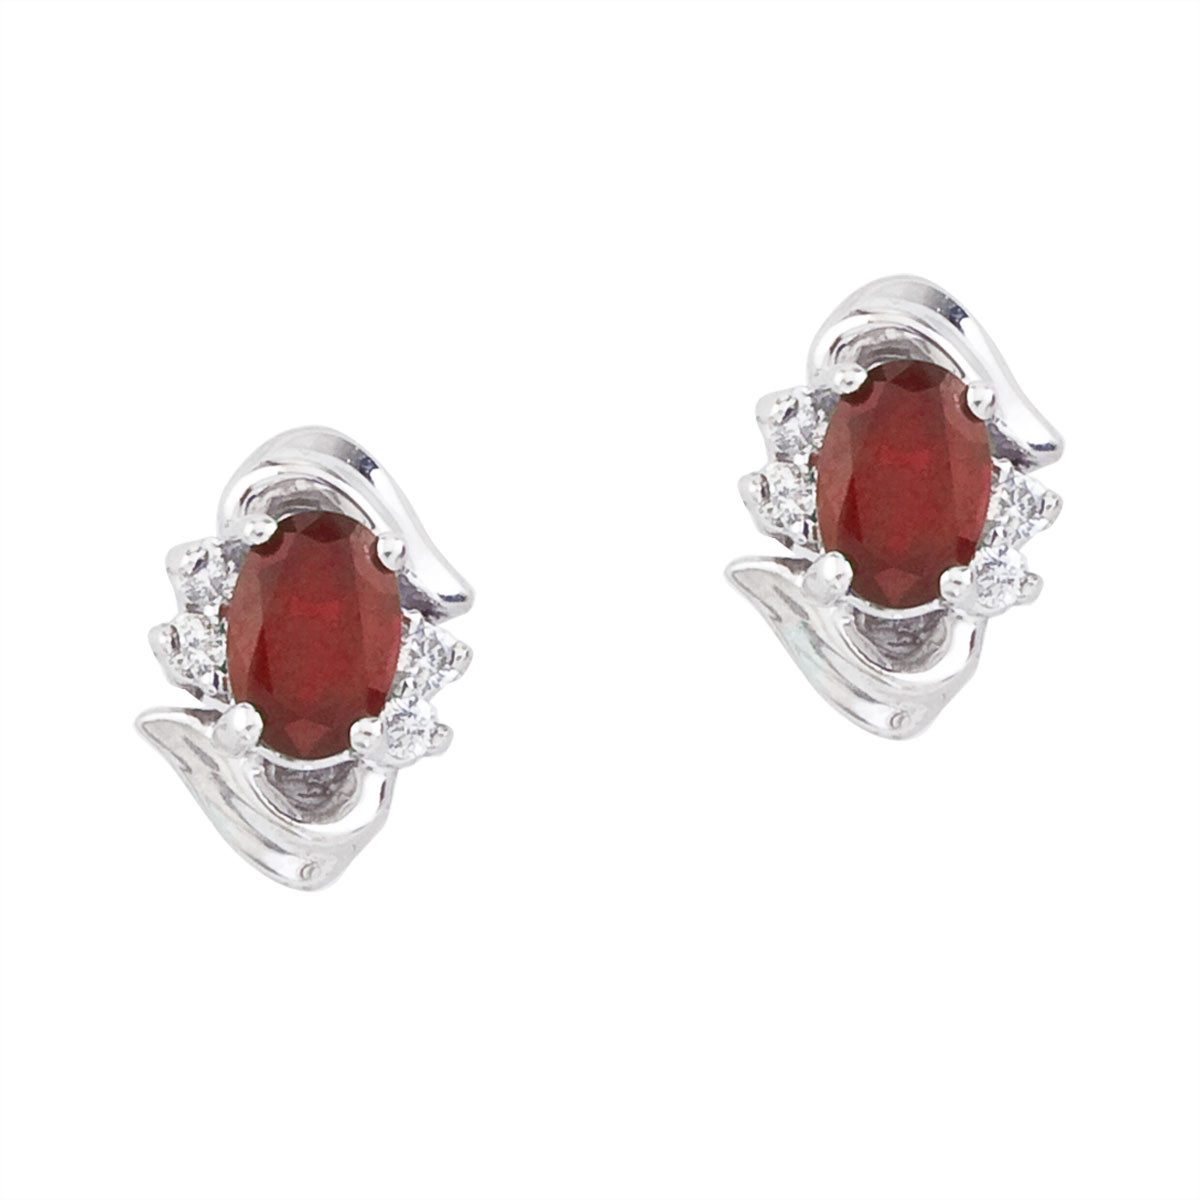 Stunning 14k white gold and ruby earrings. Featuring natural 6x4 mm oval rubies and .11 total car...